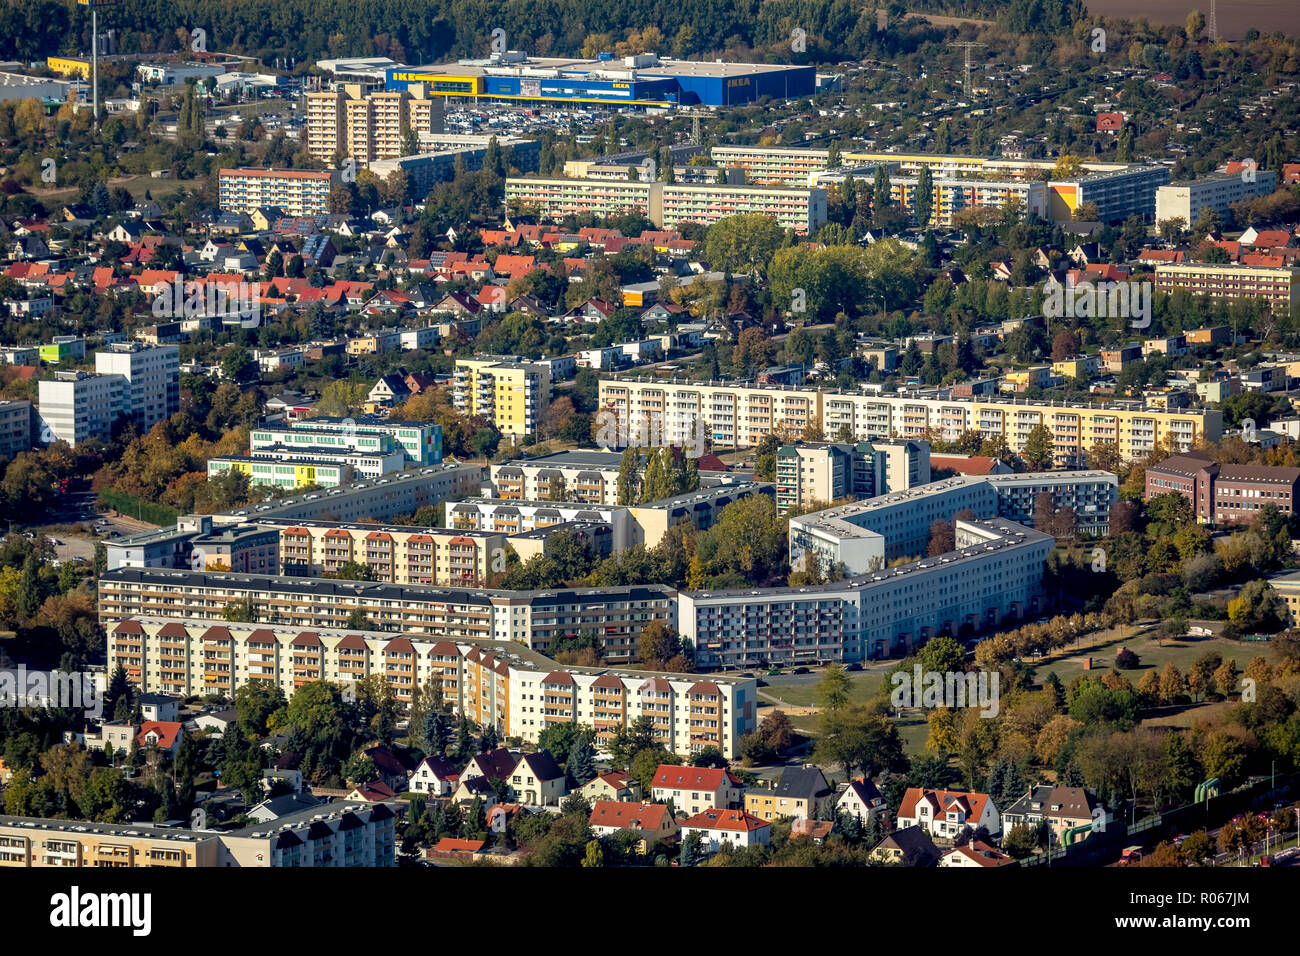 Aerial View, Housing Development New Olvenstedt, Magdeburg, Sachsen-Anhalt, Germany, DEU, Europe, aerial view, birds-eyes view, aerial photography, ae Stock Photo